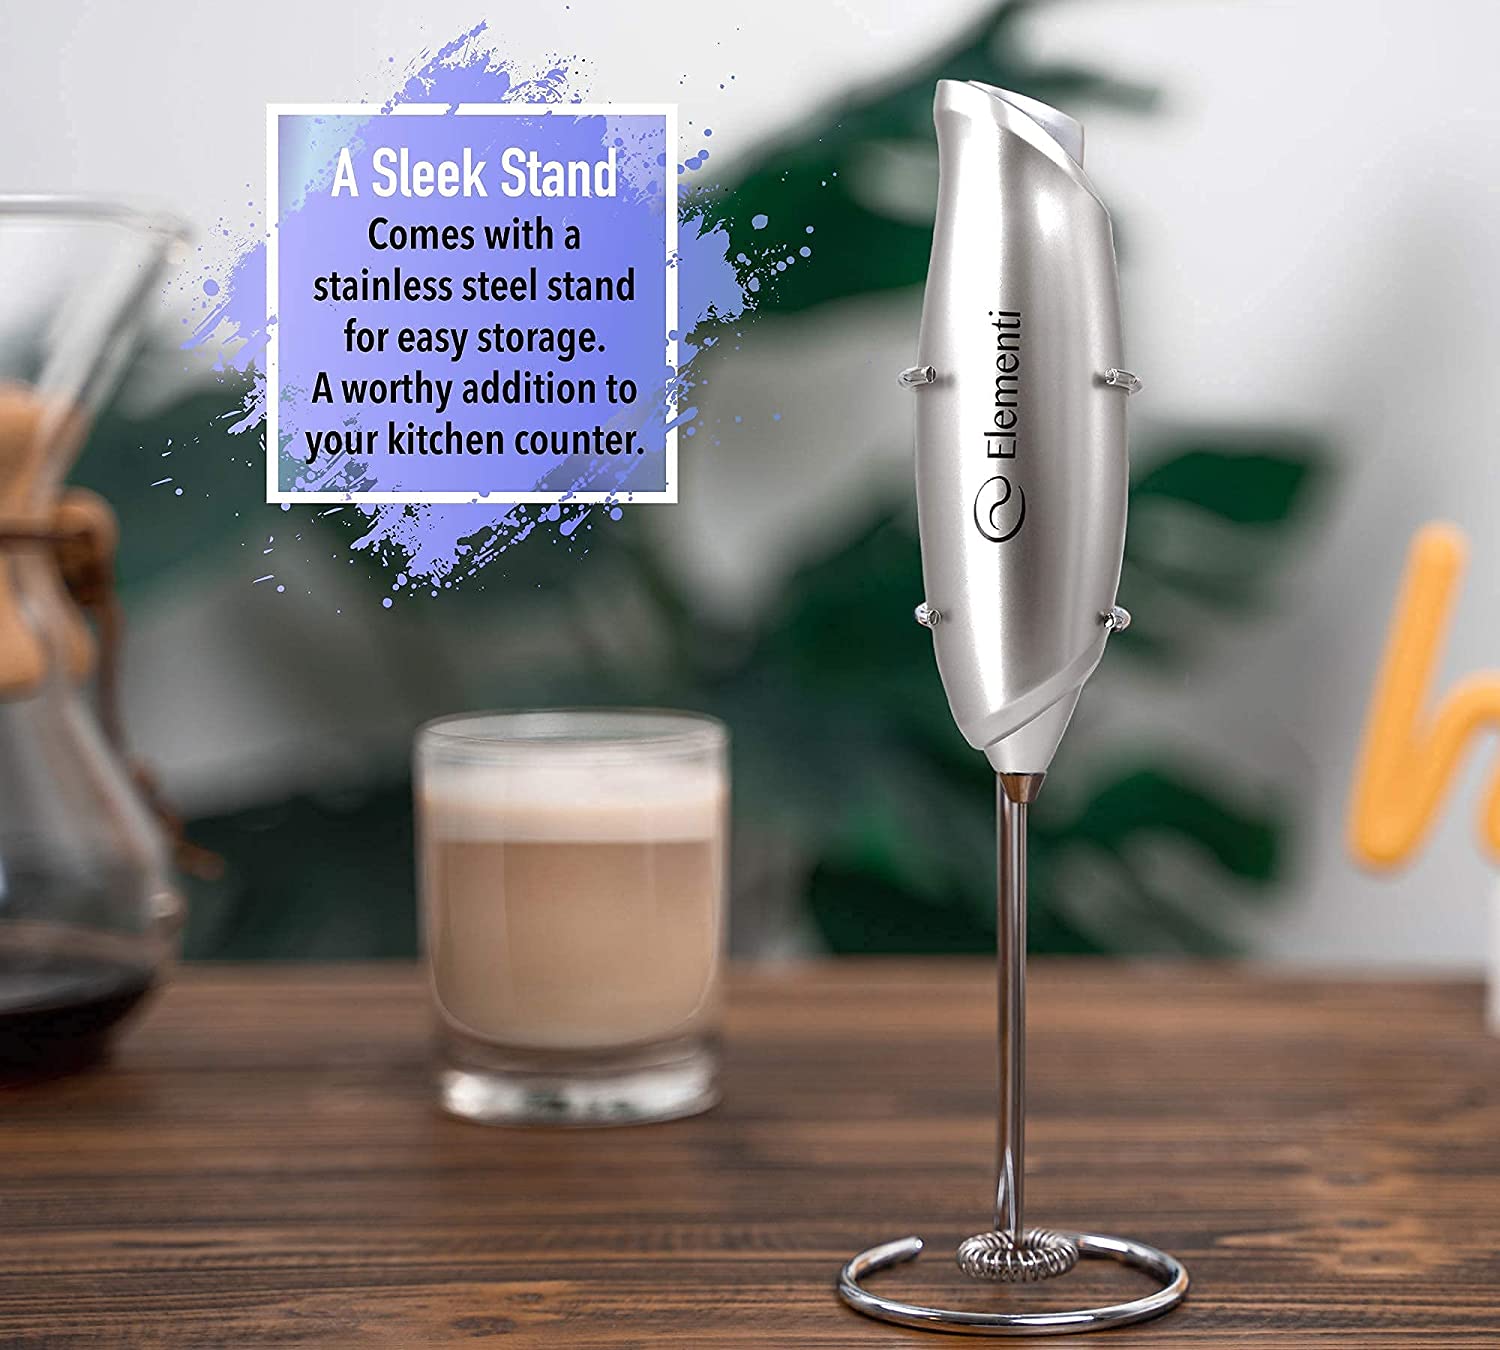 Elementi Electric Milk Frother Handheld, Matcha Whisk, Milk frother for Coffee Frother Electric Handheld Drink Mixer, Electric Mini Whisk Small Hand Mixer, Frappe Maker (Ultra Silver) - NESC-417ELE